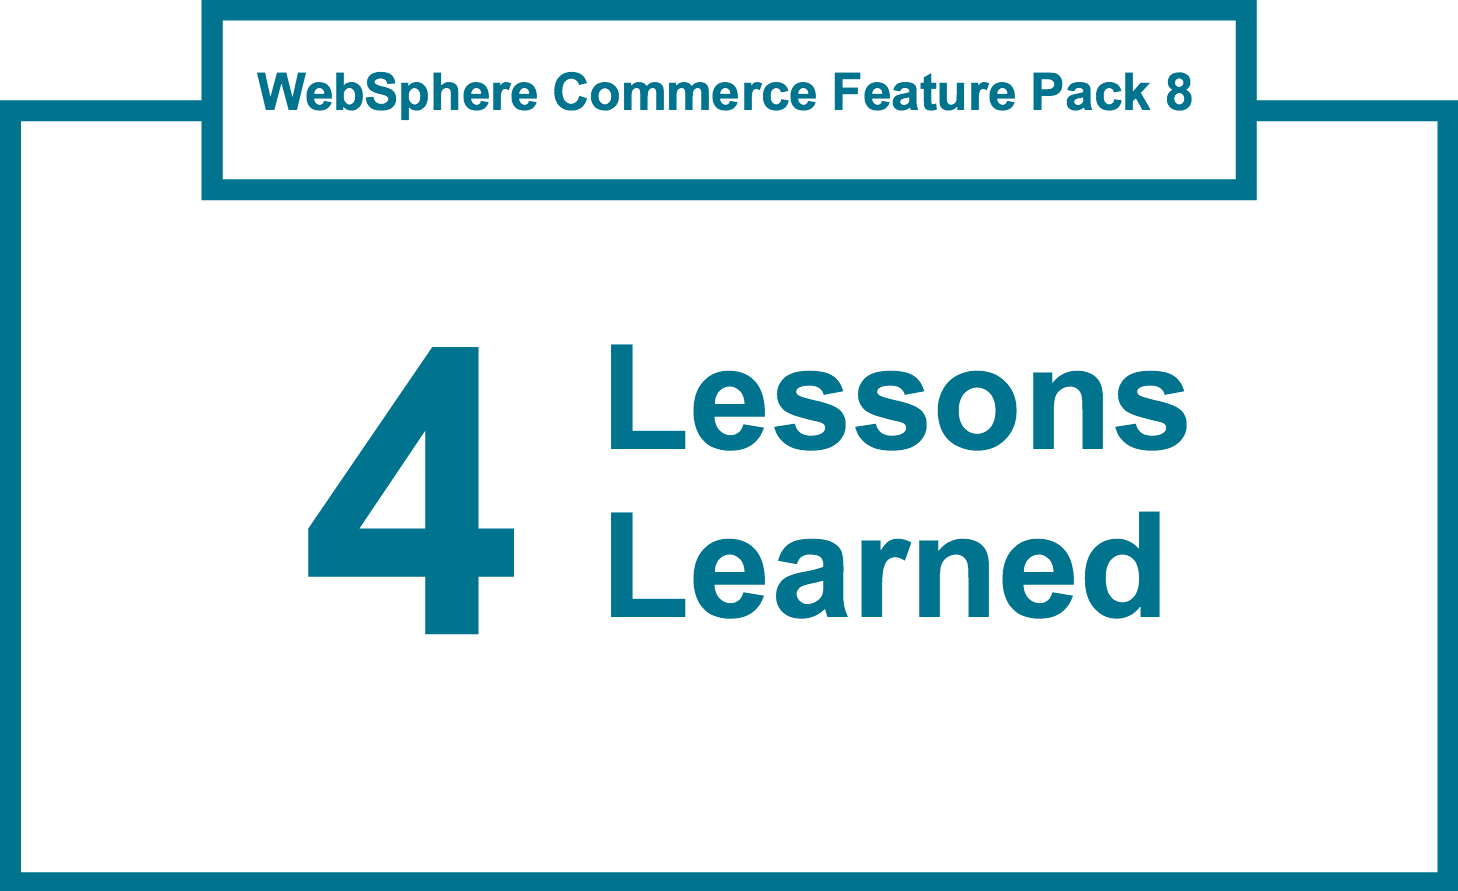 wcs_fep_8_lessons_learned